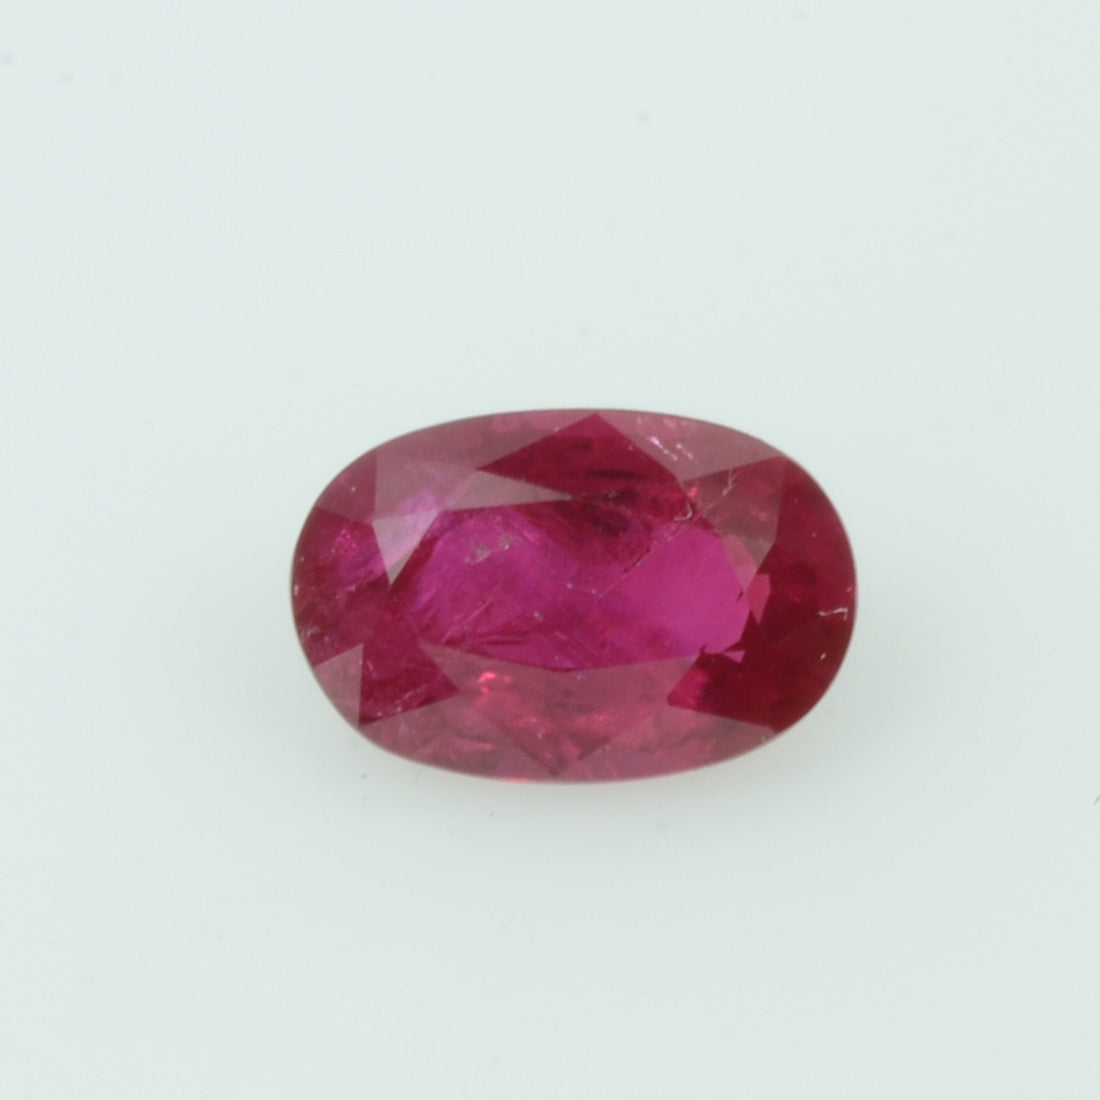 0.54 Cts Natural Vietnam Ruby Loose Gemstone Oval Cut